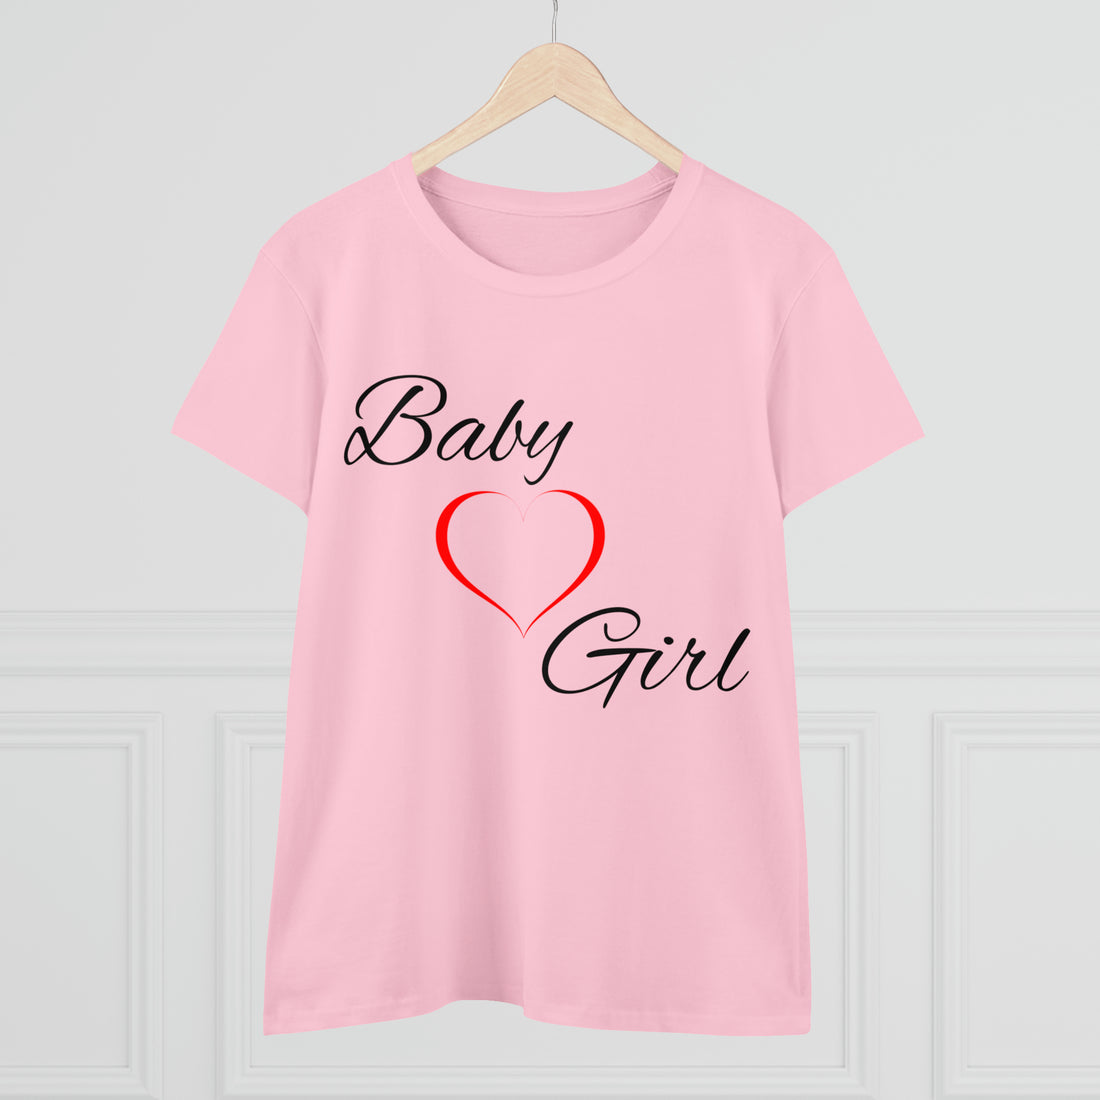 Introducing Our New Designed Baby Girl T-Shirt!